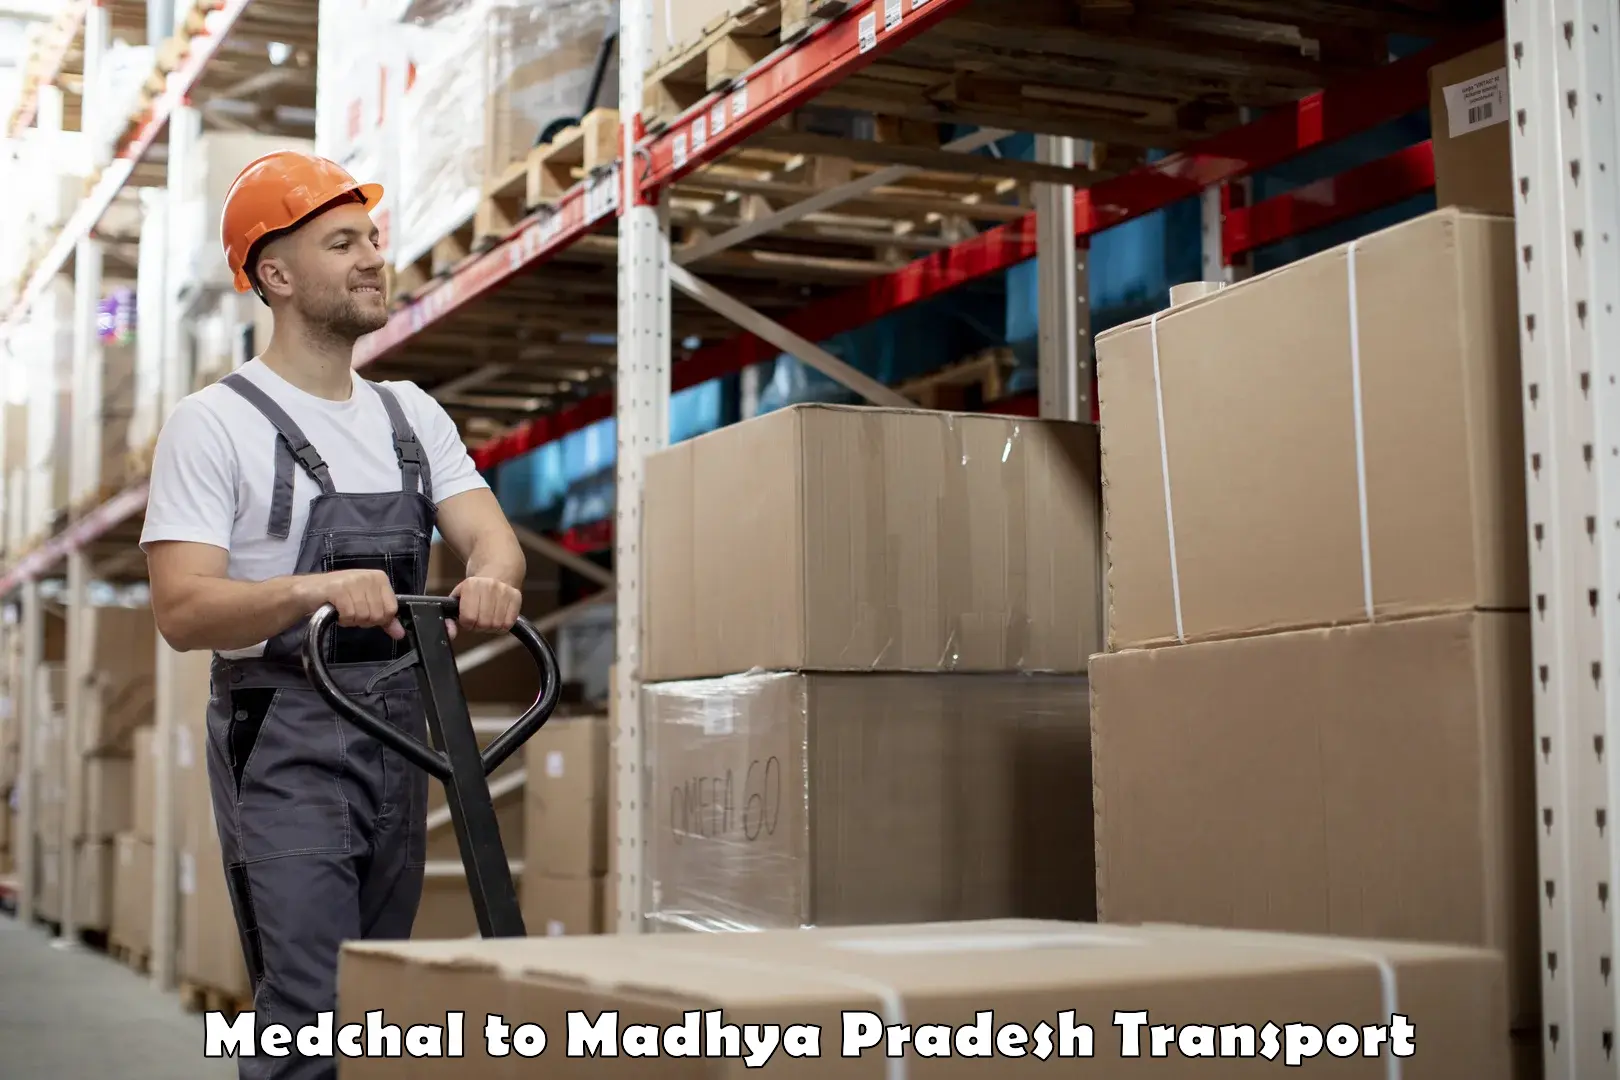 Truck transport companies in India Medchal to Budaganj